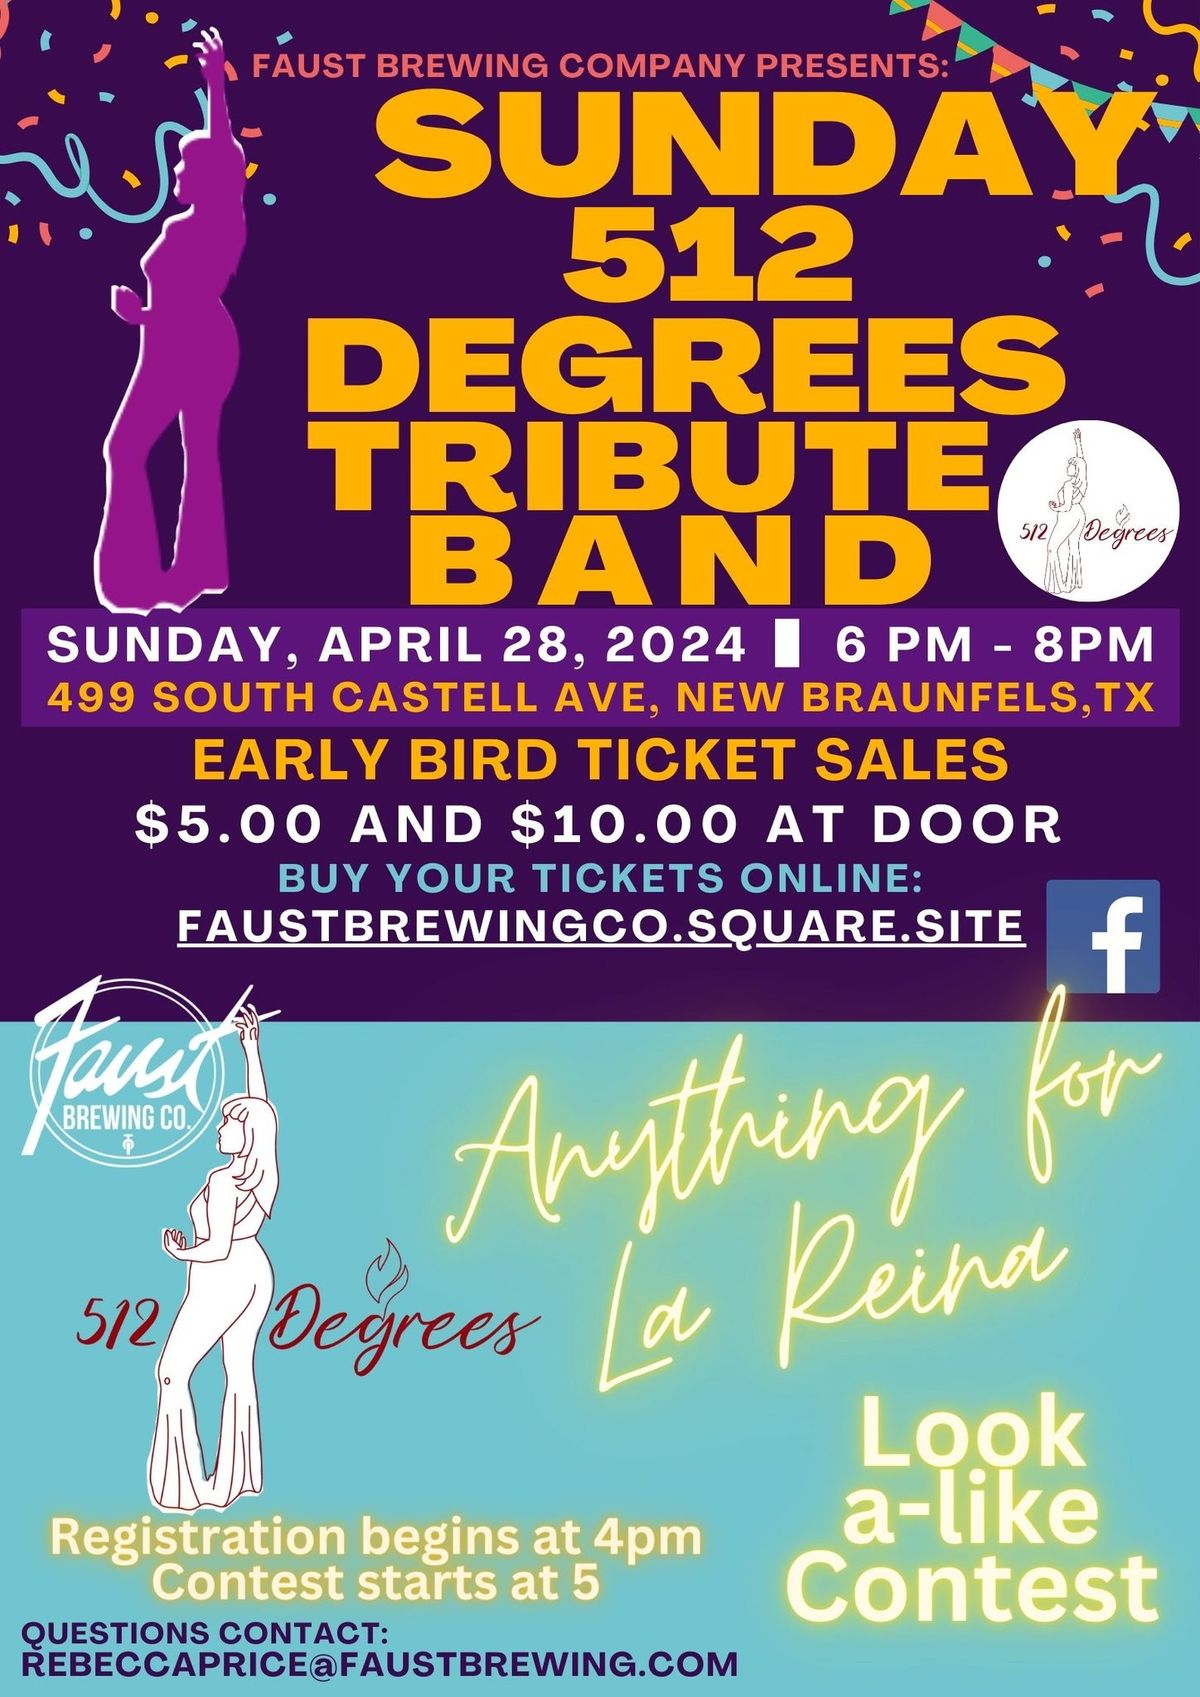 512 DEGREES TRIBUTE BAND: ANYTHING FOR LA REINA